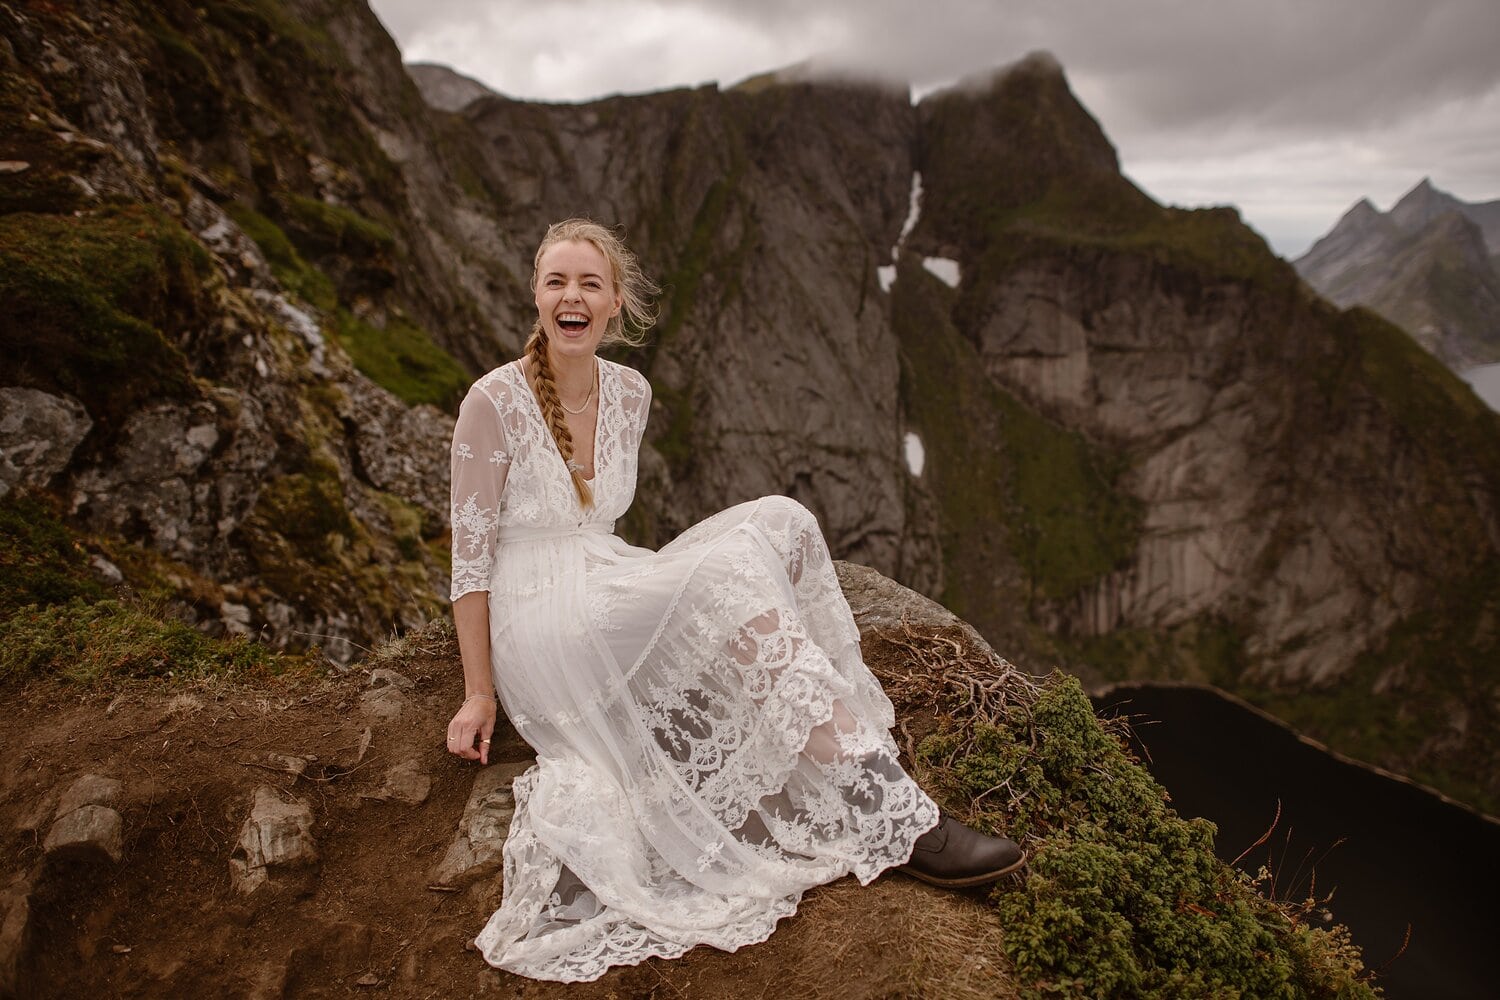 Bride sitting on a cliff and laughing. She is wearing a white, embroidered wedding dress. 